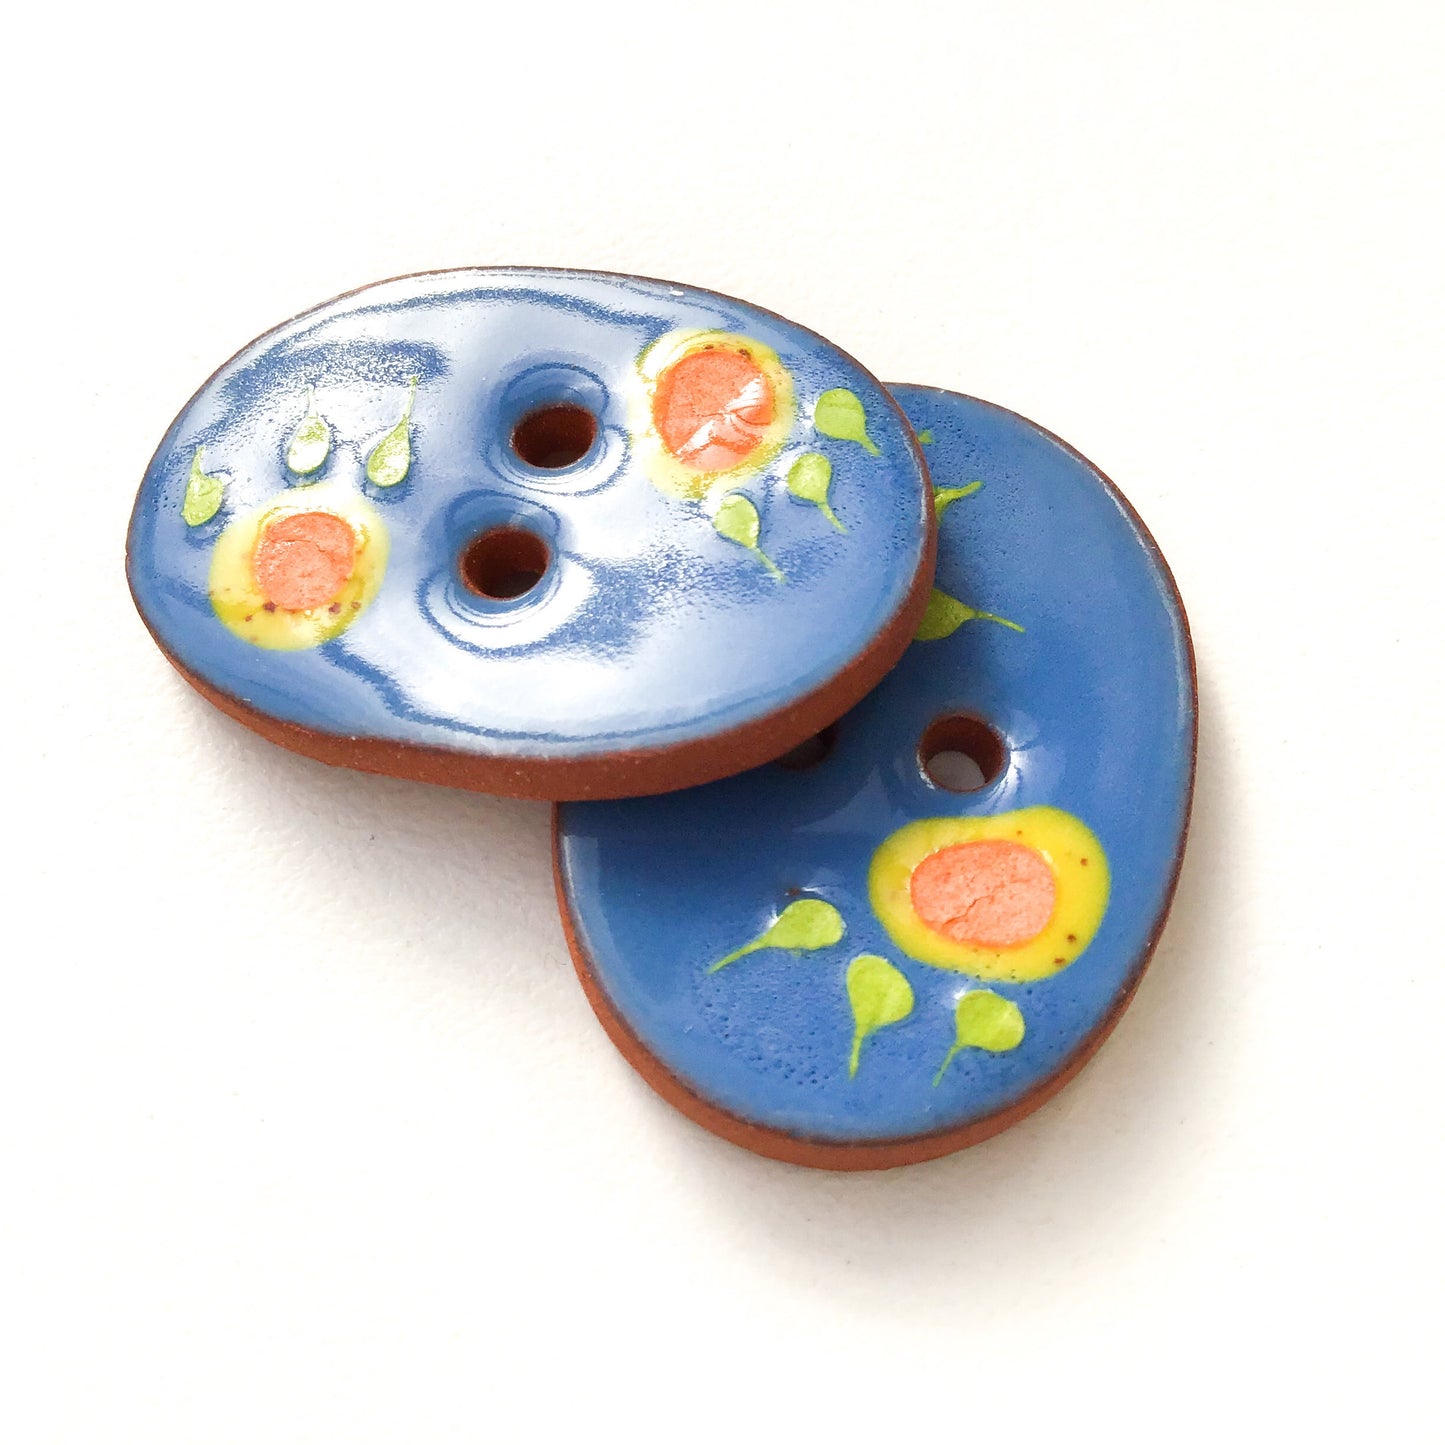 Celadon Blue Ceramic Buttons with Orange & Yellow Flowers - Oval Clay Buttons - 7/8" x 1 1/4"